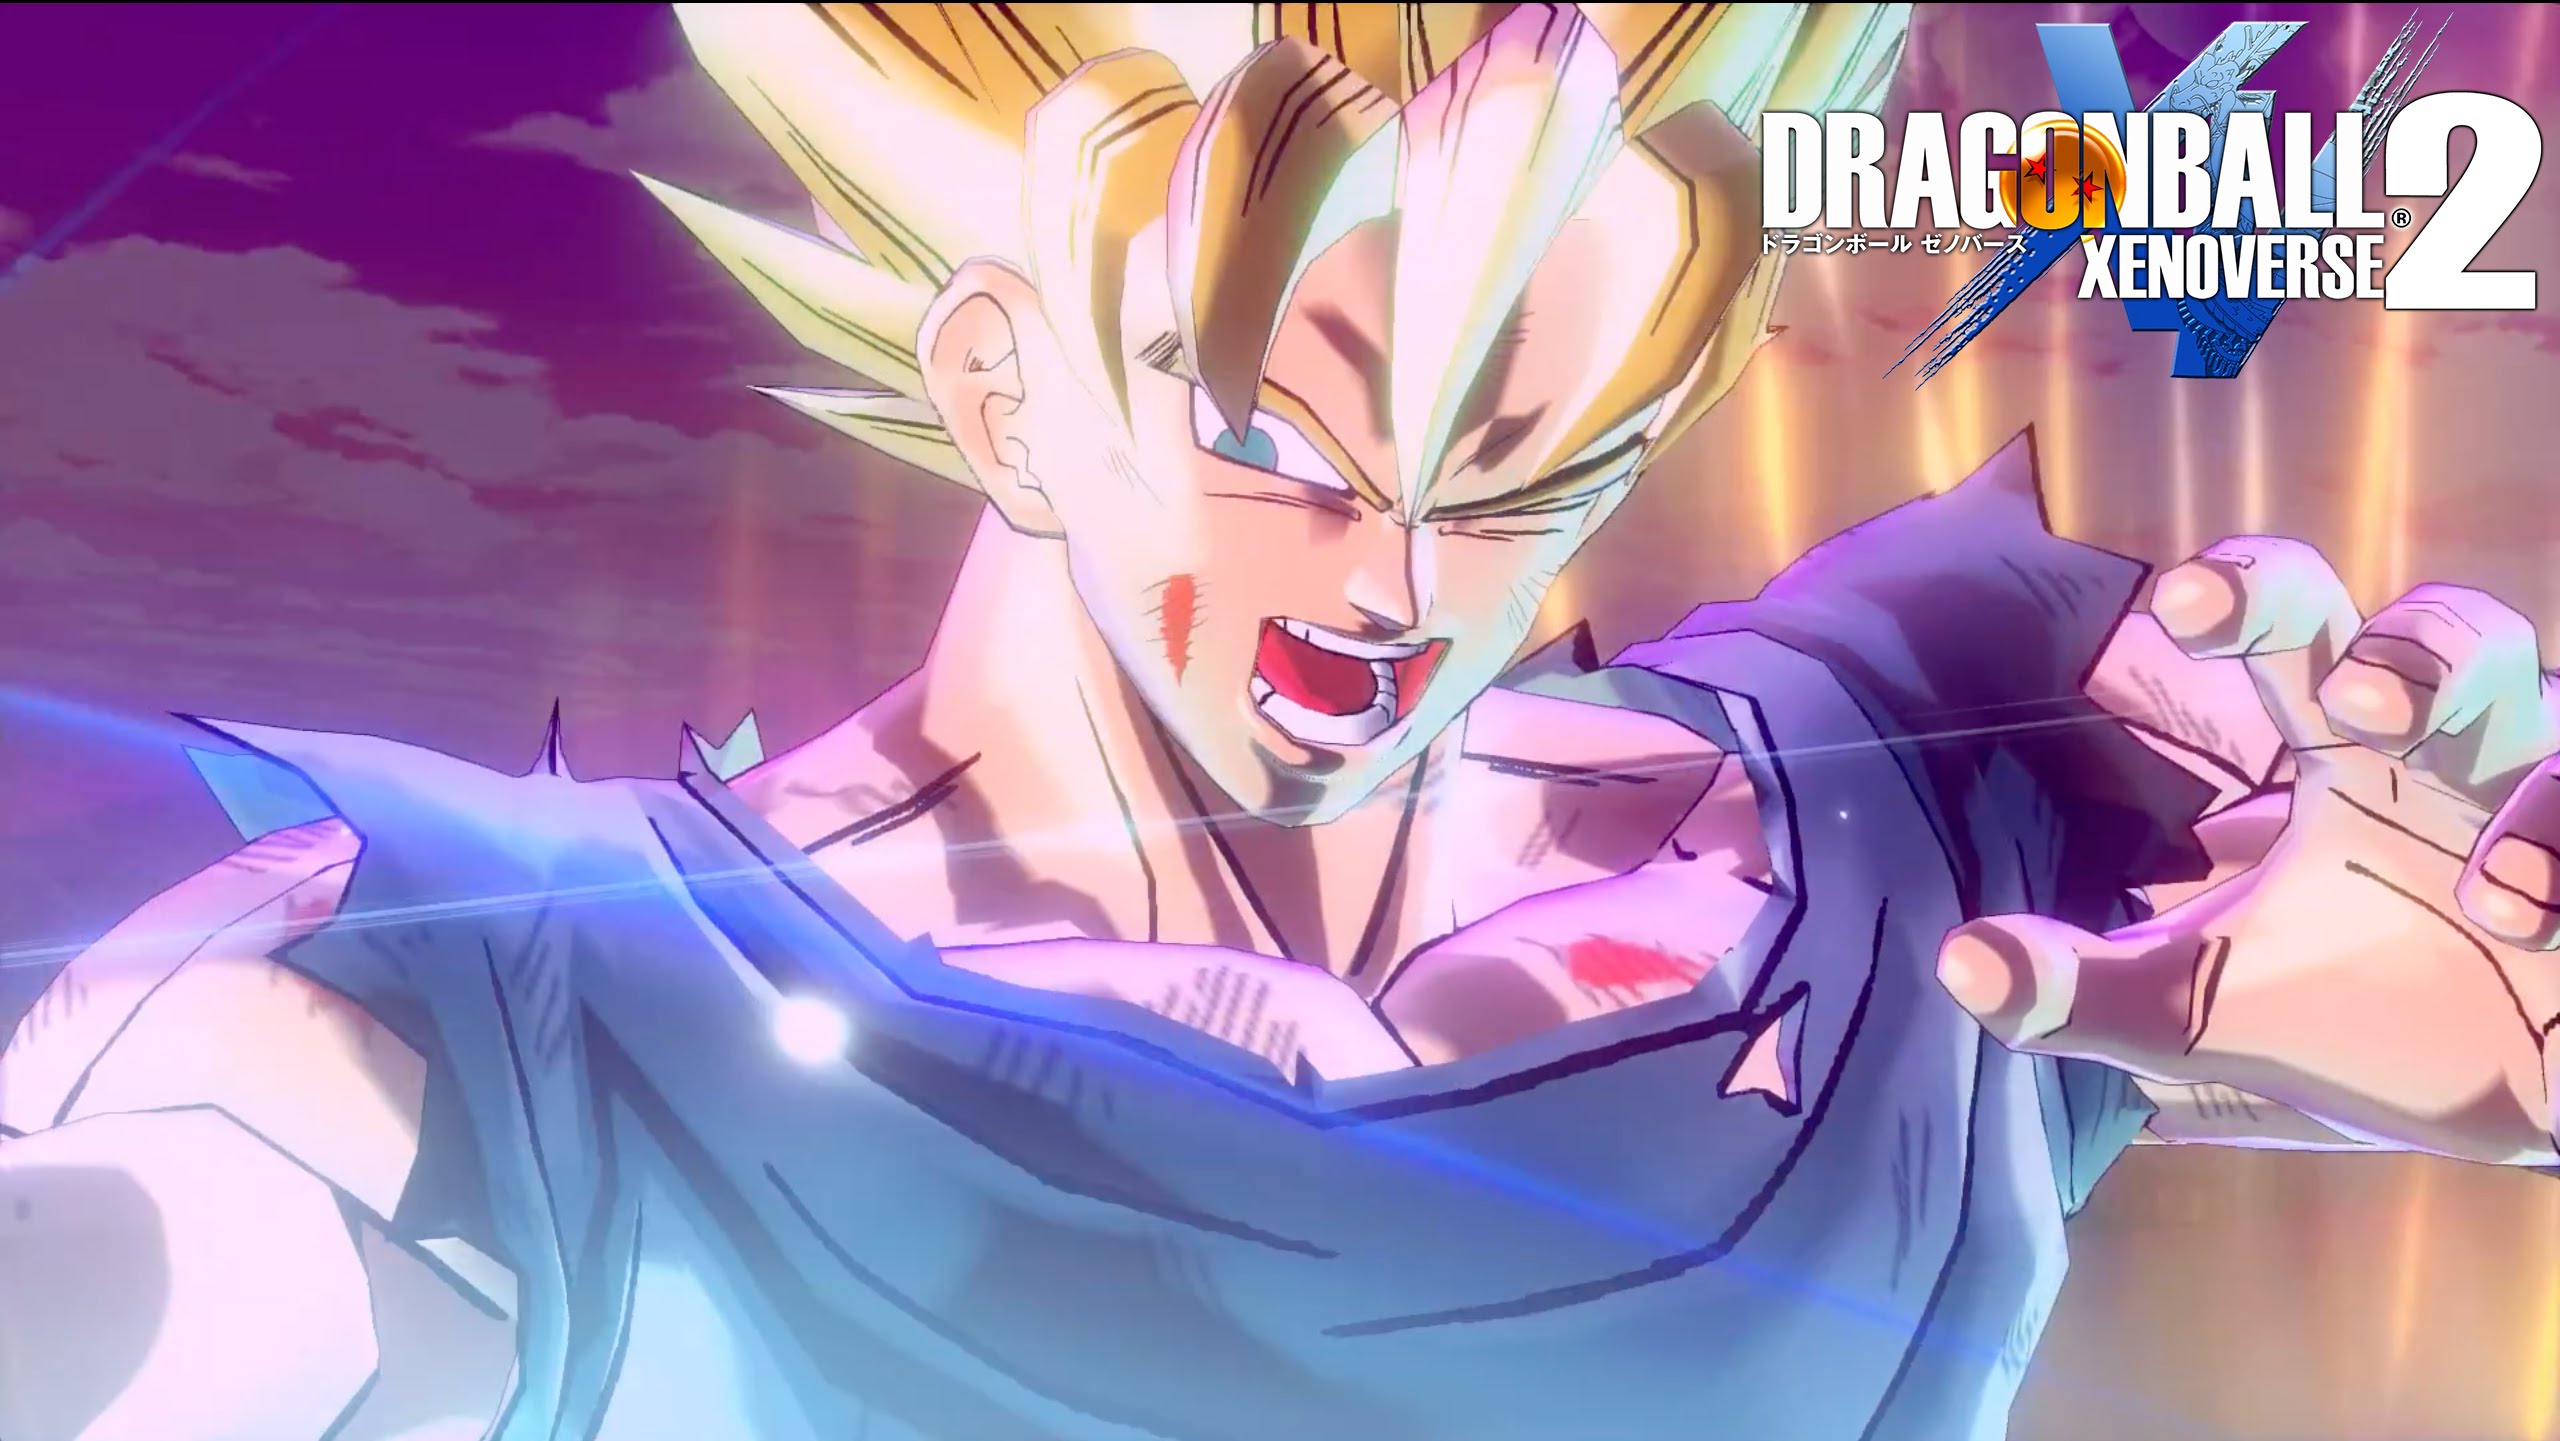 ‘Dragon Ball Xenoverse 2’ getting two huge updates Feb 27 and 28